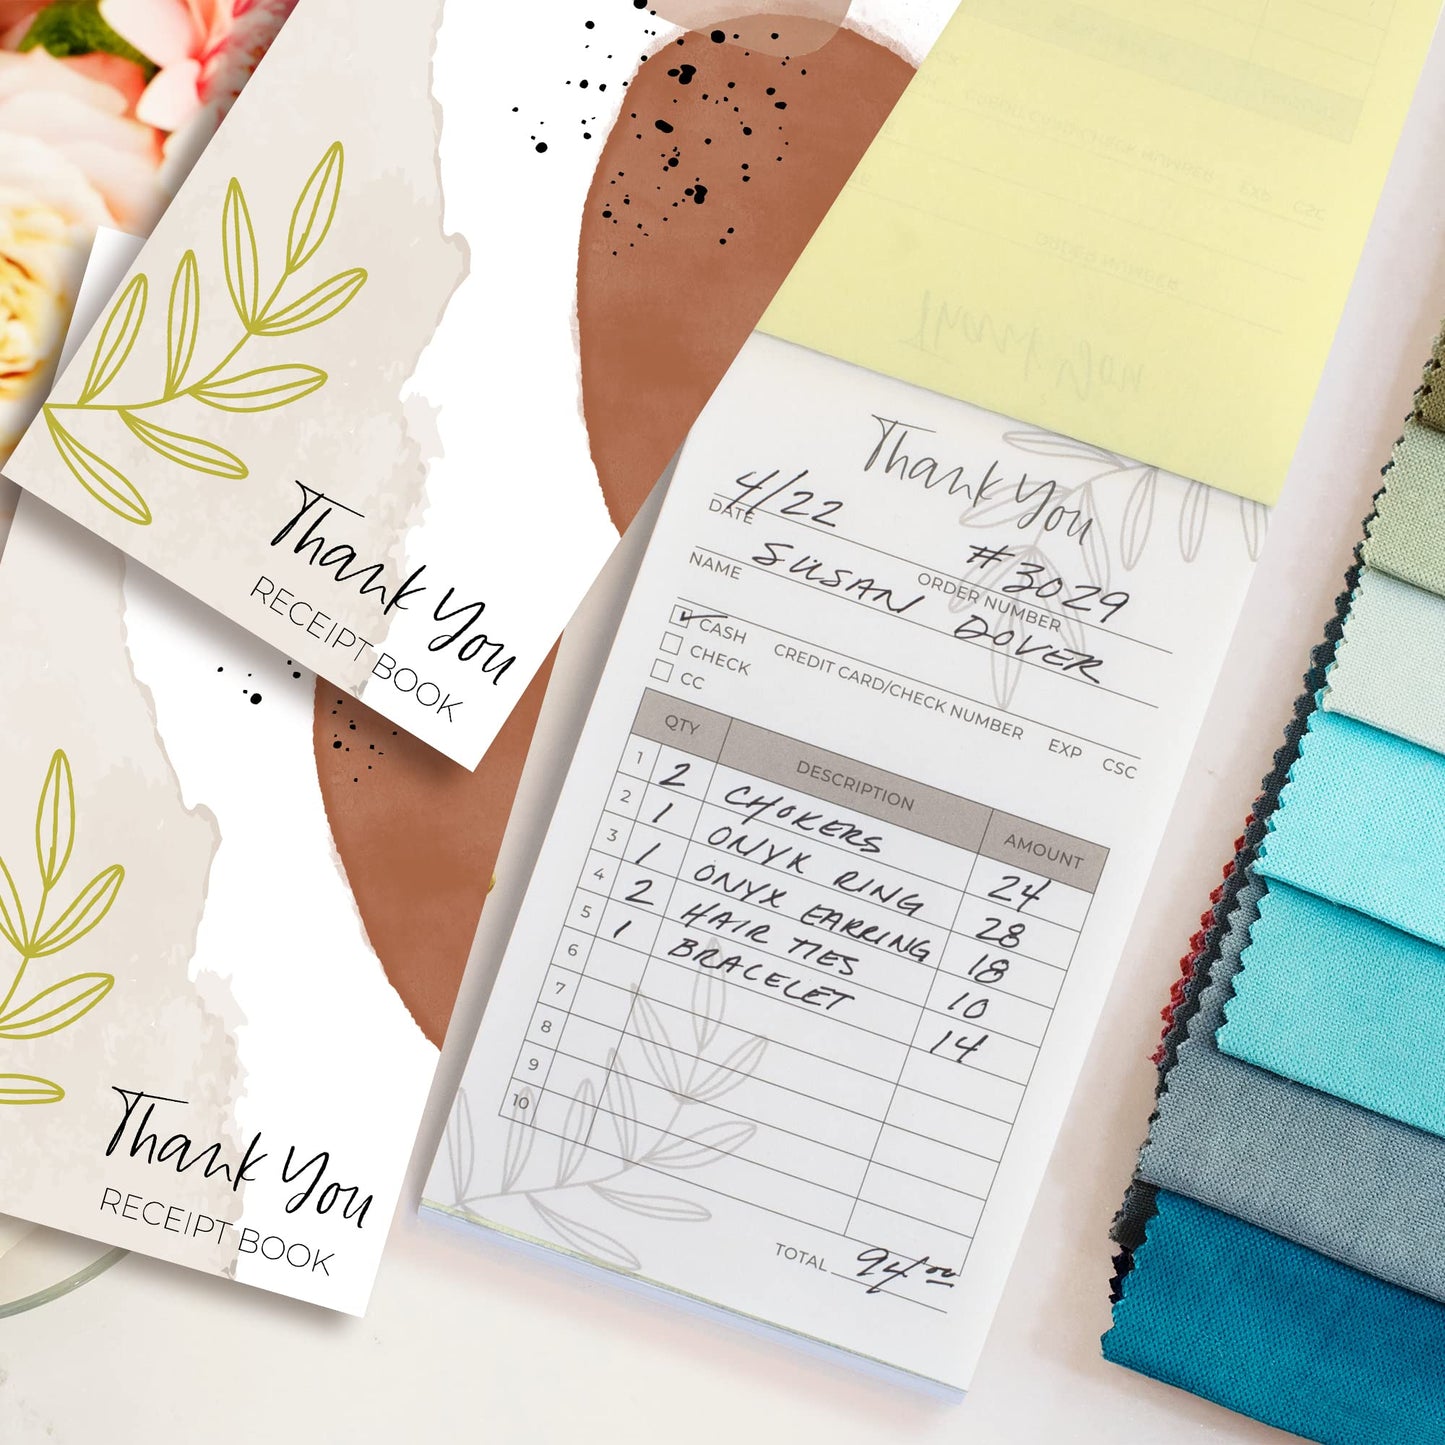 Simplified Thank You Receipt Book Set of 3 for Small Businesses - Aesthetic and Easy to Use Receipt Pad - The Perfect Business Supplies That Helps You and Your Happy Clients to Stay Organized